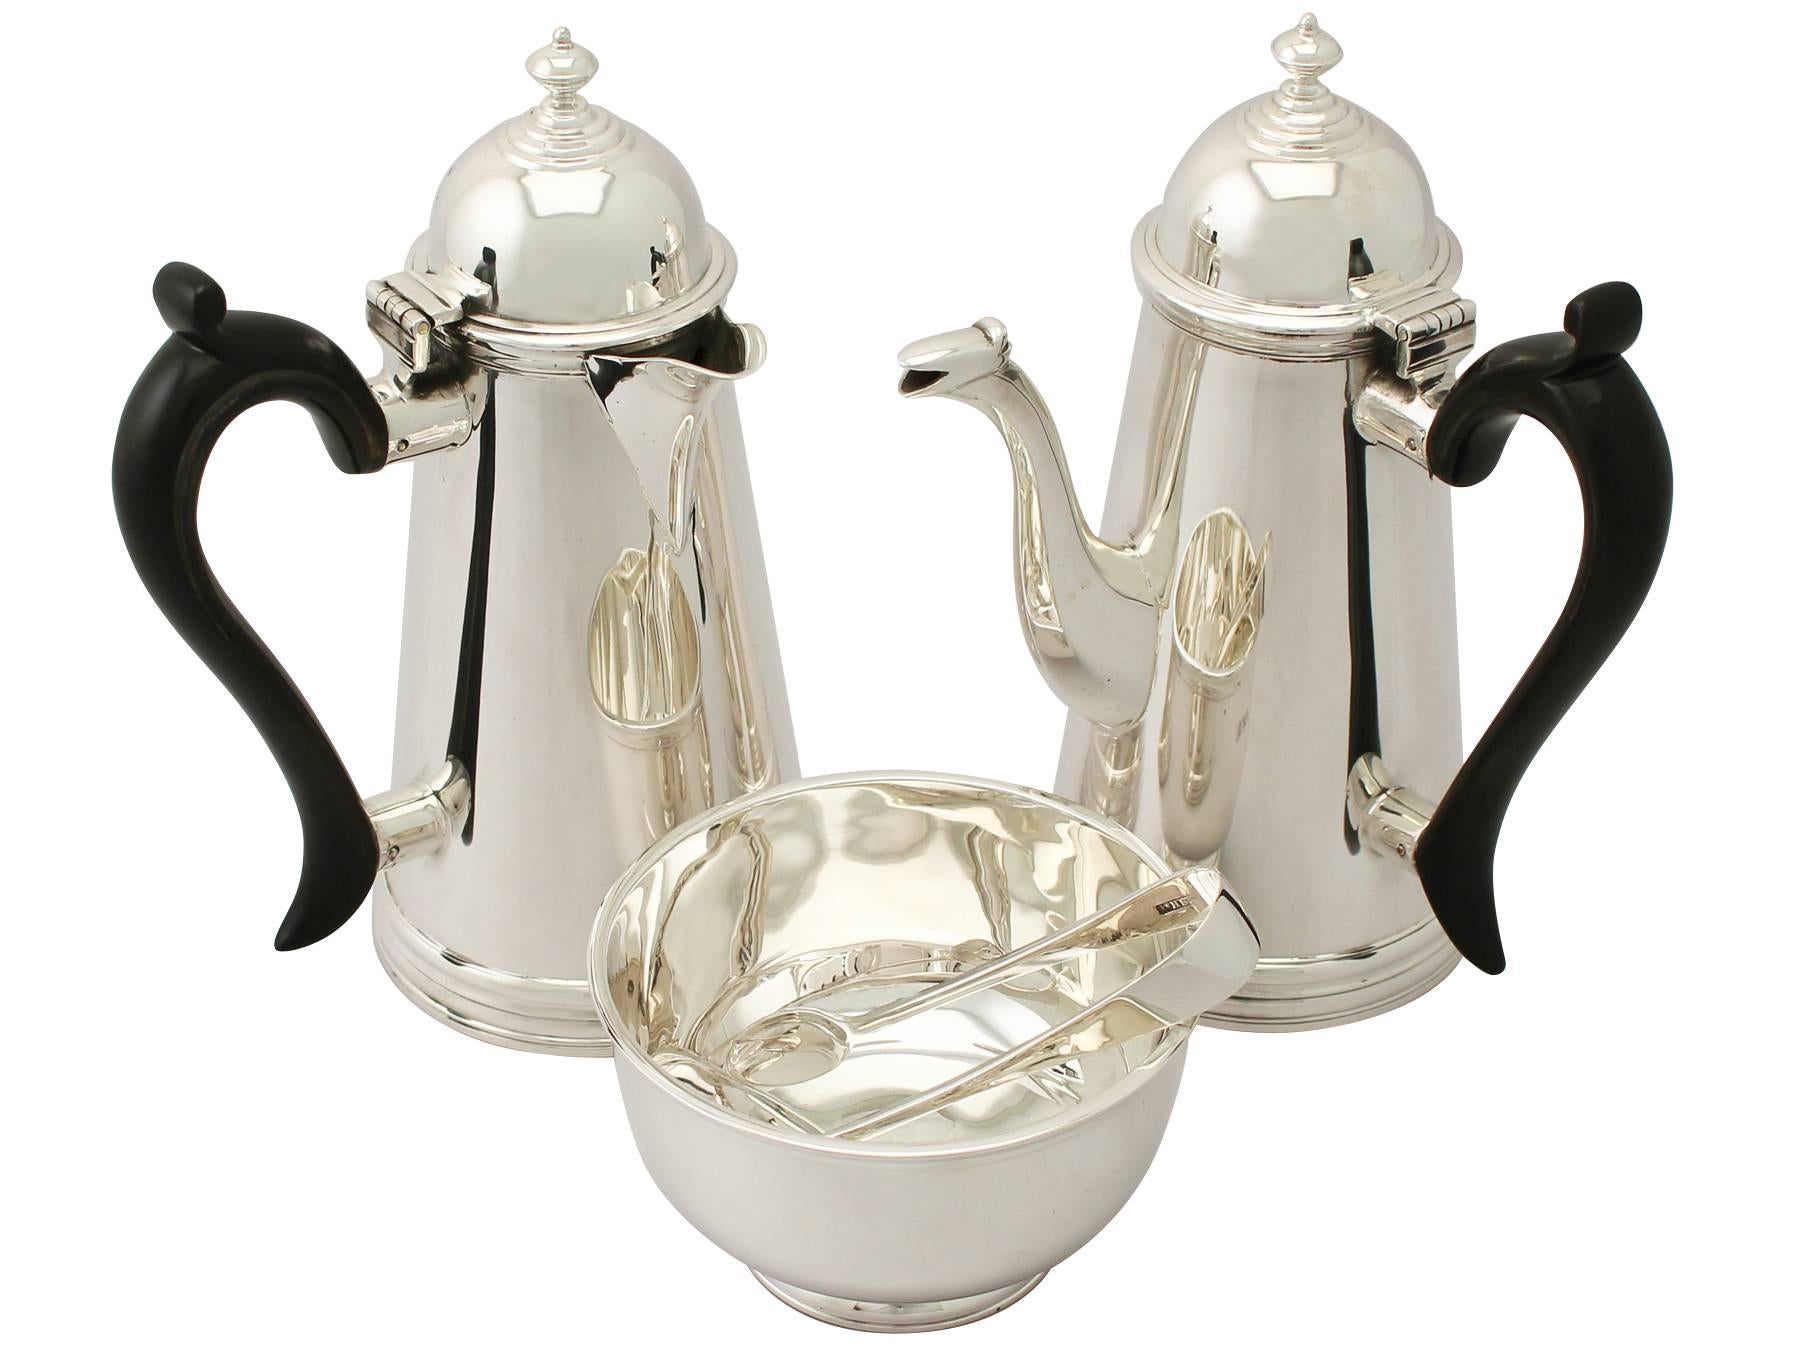 An exceptional, fine and impressive antique Edwardian English sterling silver cafe au lait set made by C S Harris & Sons Ltd in the George I style - boxed; an addition to our silver teaware collection.

This exceptional antique Edwardian sterling